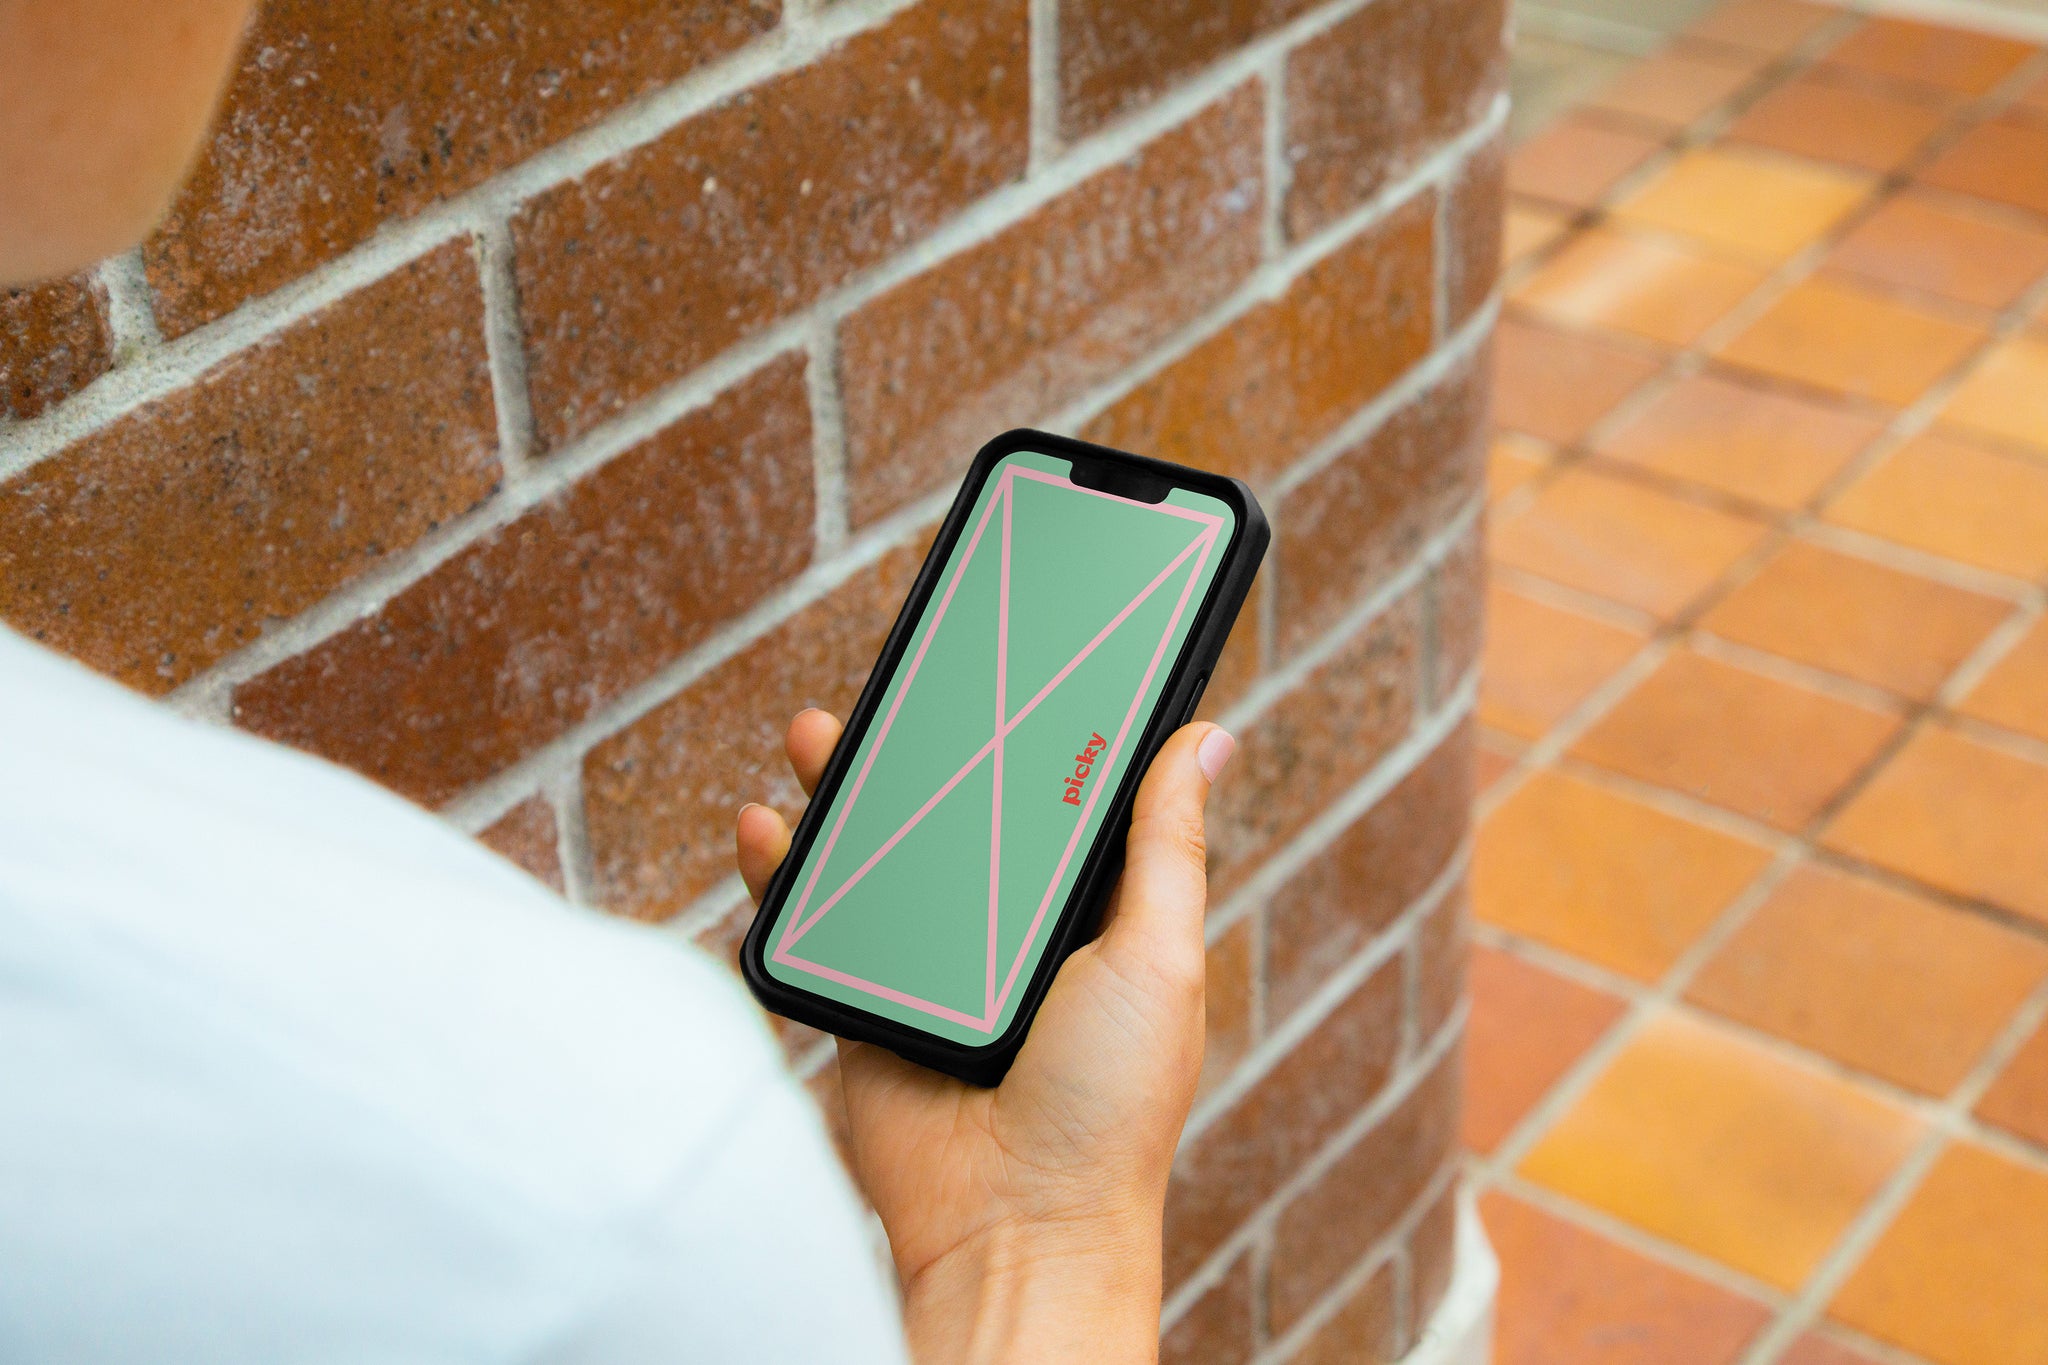 Lady holding smart phone standing against brick wall and path. Smartphone has screen turned on with green colour on sceen with pink grid lines visible.